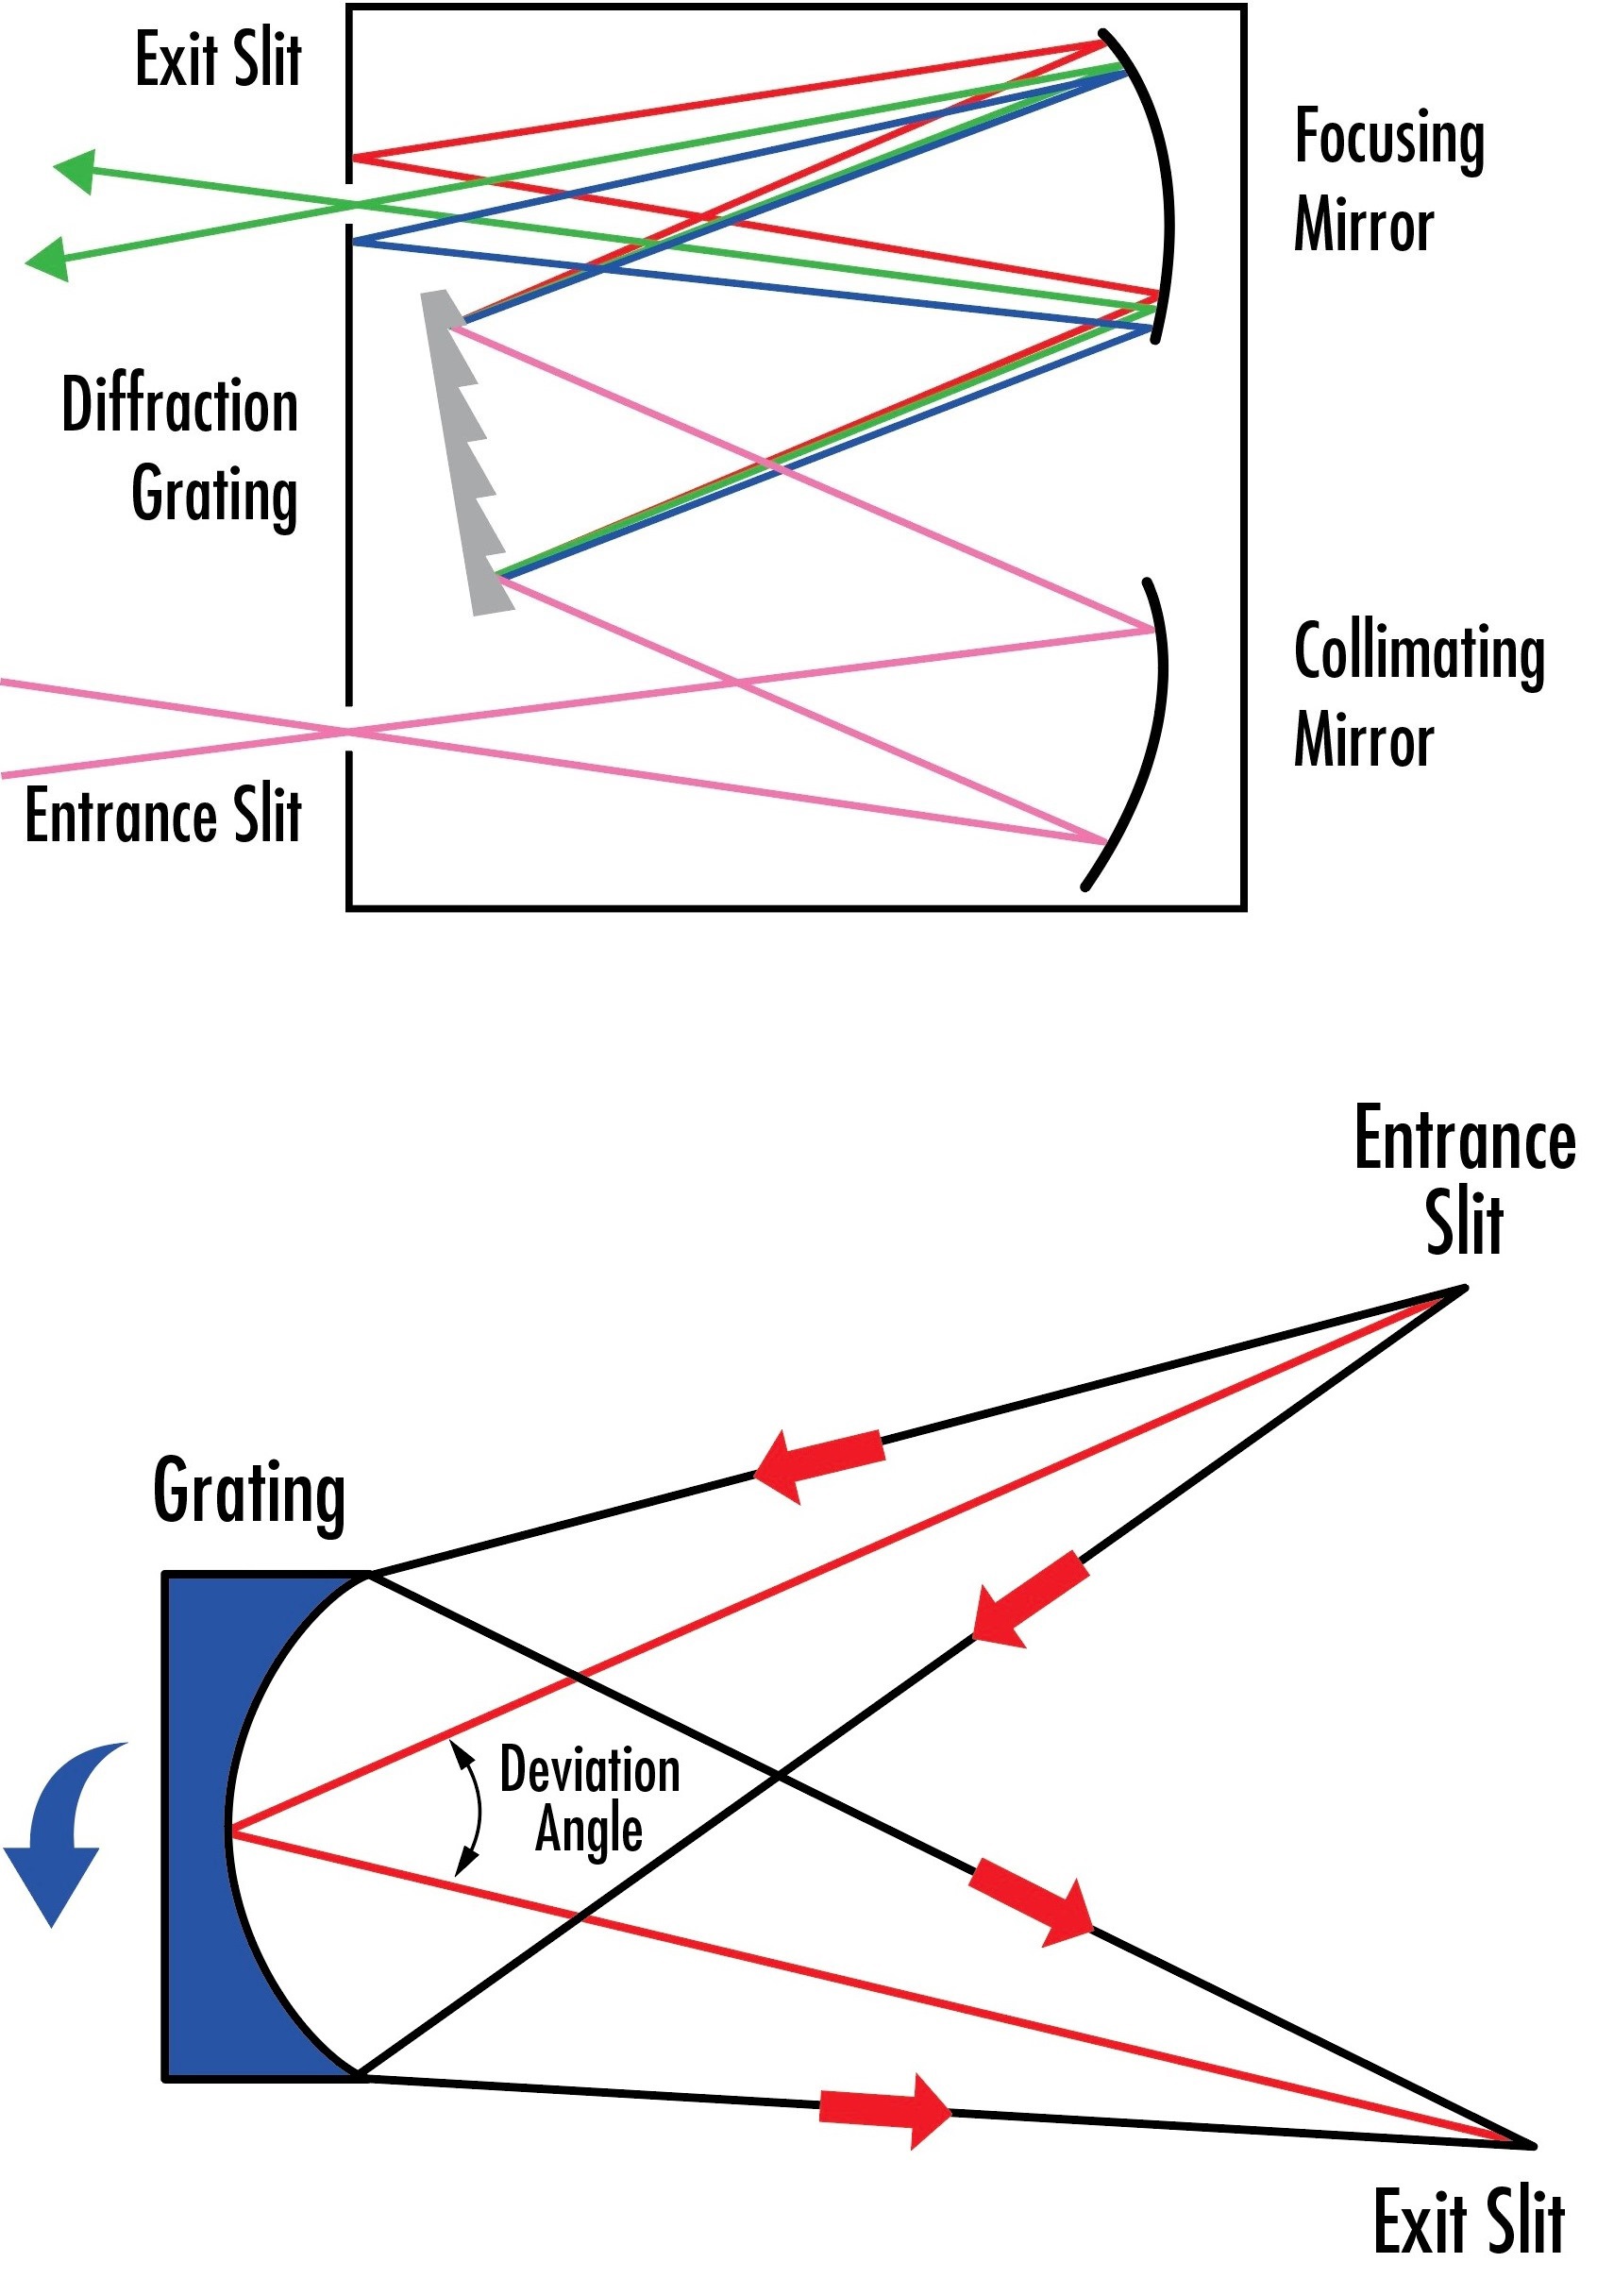 Both plane grating monochromators (top) and concave grating monochromators (bottom) rotate gratings to scan diffracted orders across the exit slit and precisely determine what wavelengths can leave the device